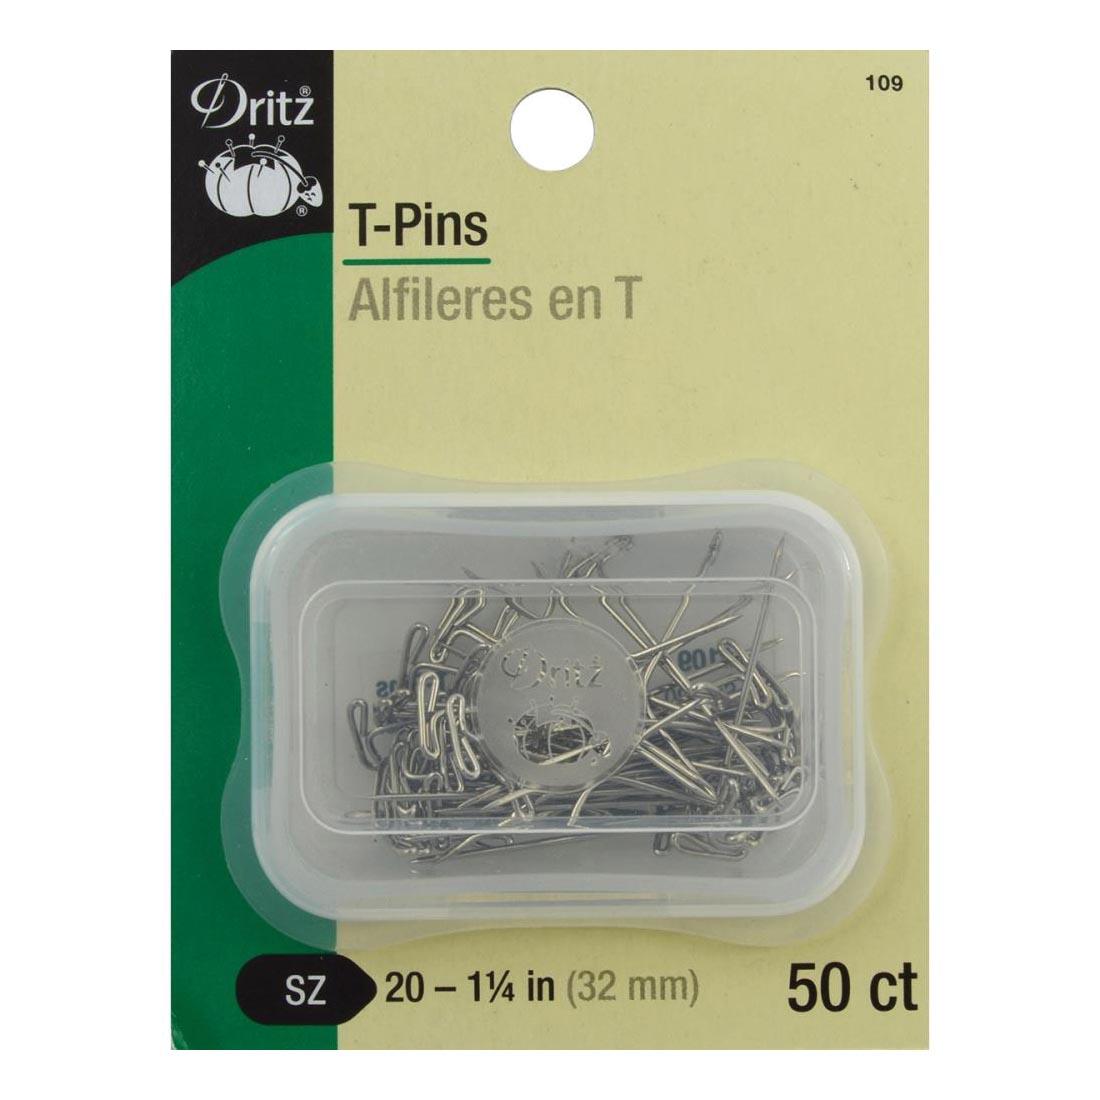 size 20 Dritz T-Pins, shown in package